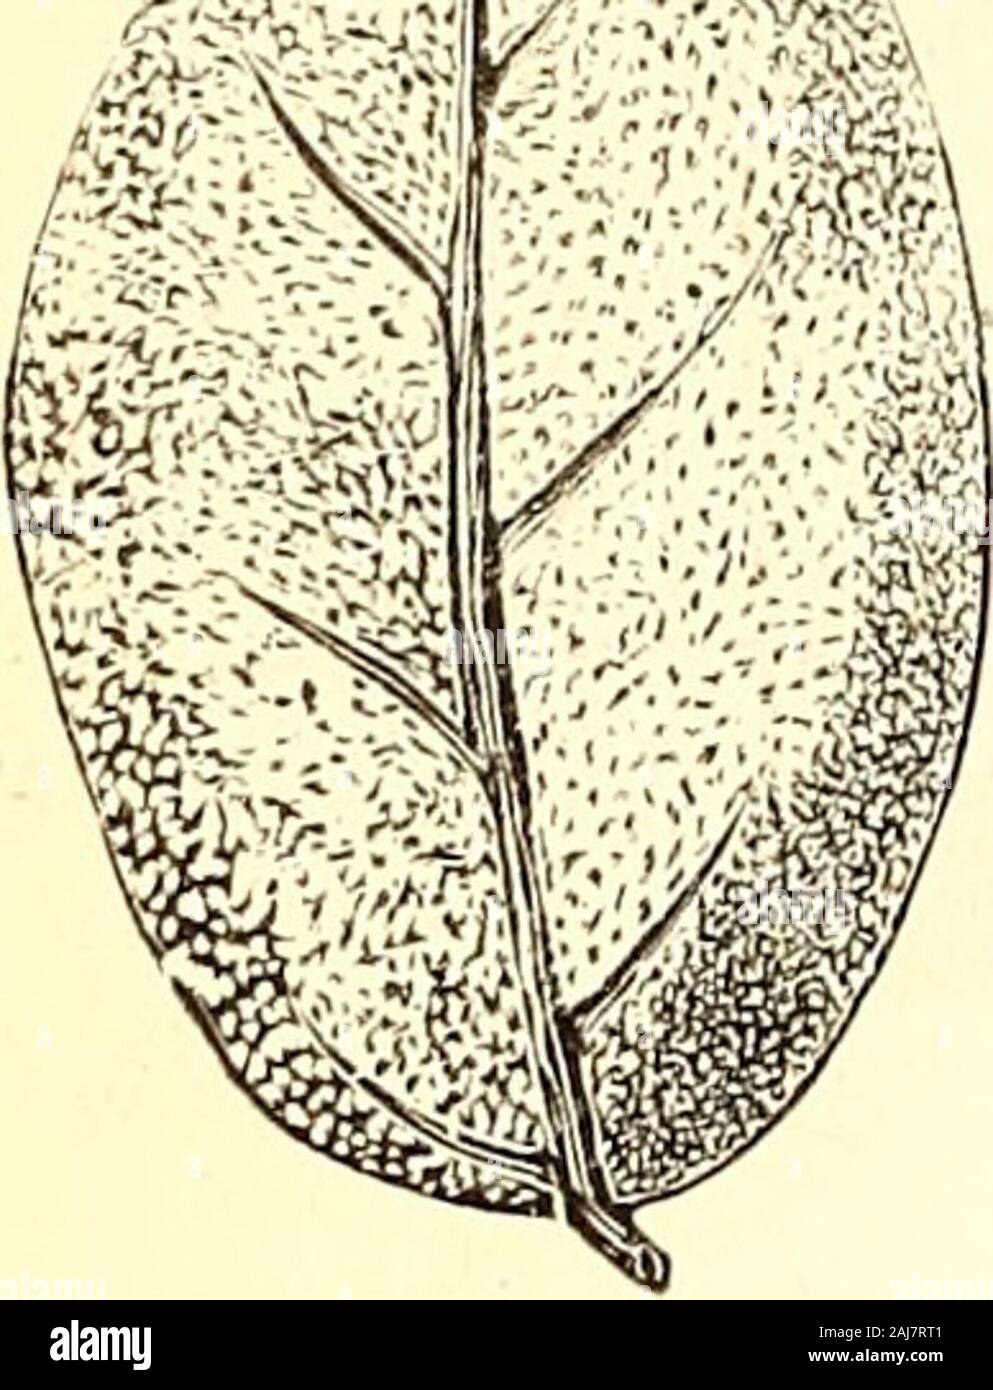 American journal of pharmacy . Micromeria Douglasii. a, leaf and calyx, natural size, b, simple baiivmagnified 300 diam. c, cuticle, and d, gland, magnified 300 diam. The cuticle on both surfaces of the leaves is firm. The hairs arefirm, conical, mostly two-celled, and rest, witli a broad base, upon thesomewhat prominent parent cell. The glands are contaiued in concavedepressions, are depressed, have a. simple stipe cell, and ccmtain a yel-low secretion.—Fhar. Centralhalle, 1882, No. 29. Eugenia Cheken, Molina.—From Dr. J. Moellers descri])tion ofcheken leaves we take the following, supplement Stock Photo